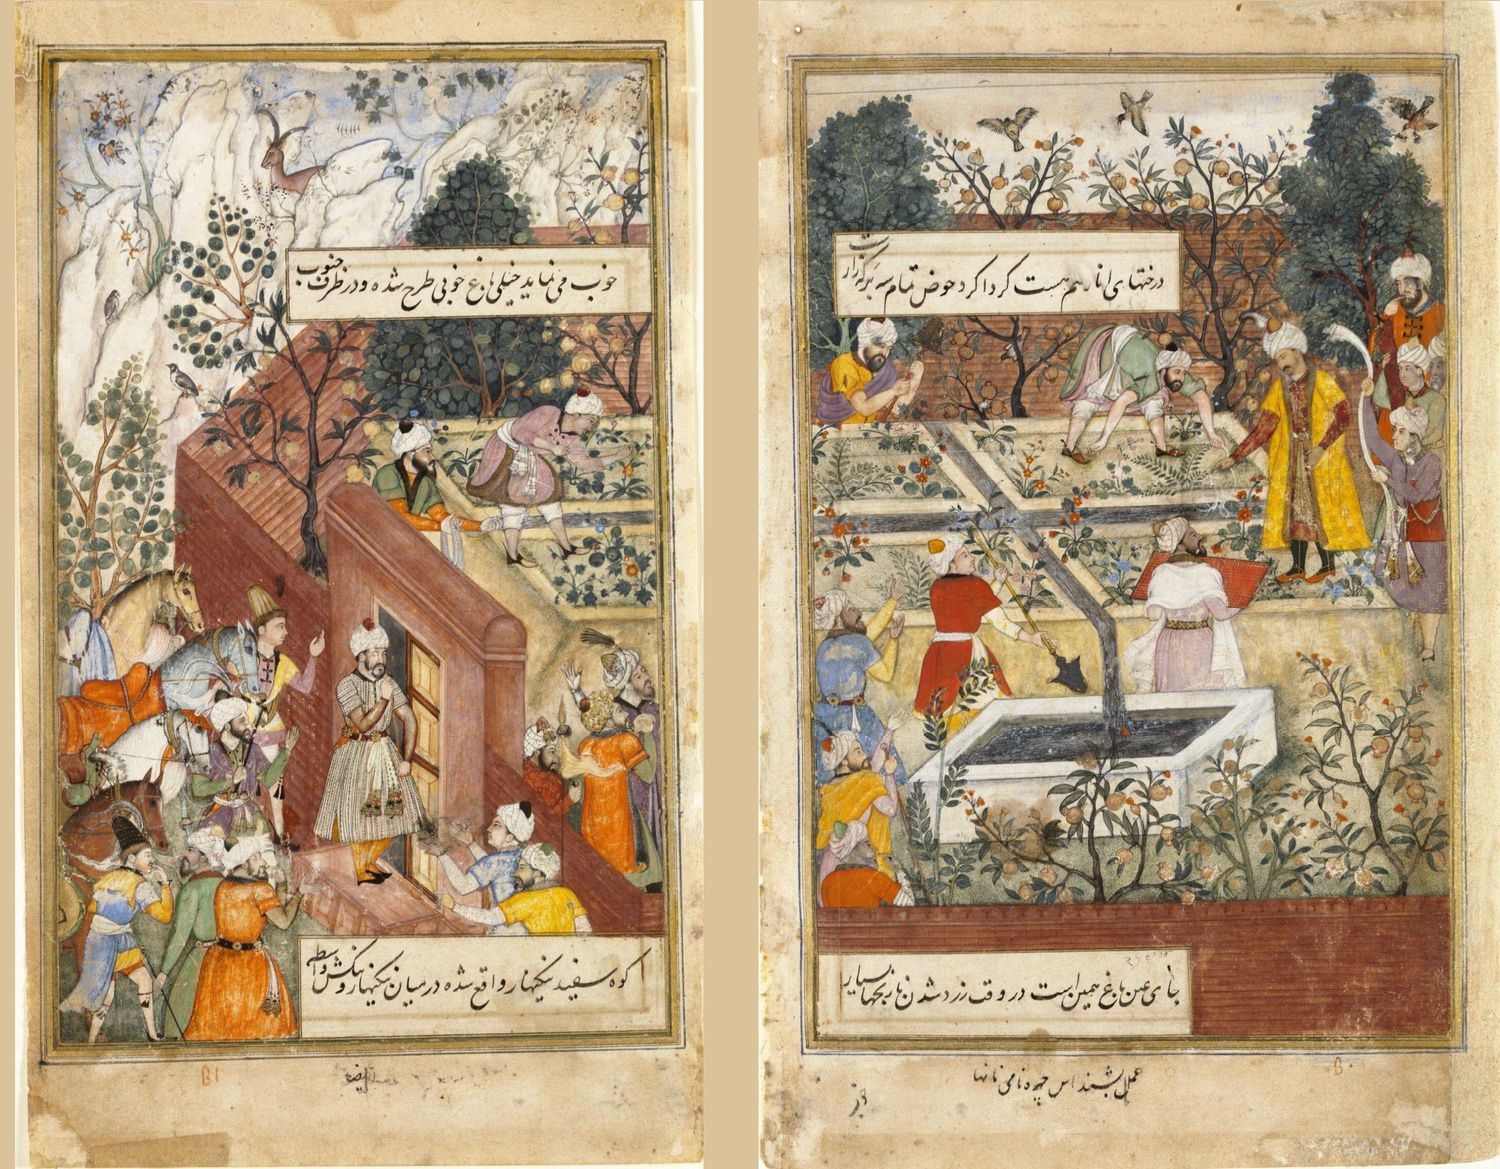 Two pages from the illustrated Baburnama. Source: Victoria & Albert Museum. Left page. https://collections.vam.ac.uk/item/O114438/babur-supervising-the-laying-out-painting-bishndas/ Right page. https://collections.vam.ac.uk/item/O17687/painting-bishndas/